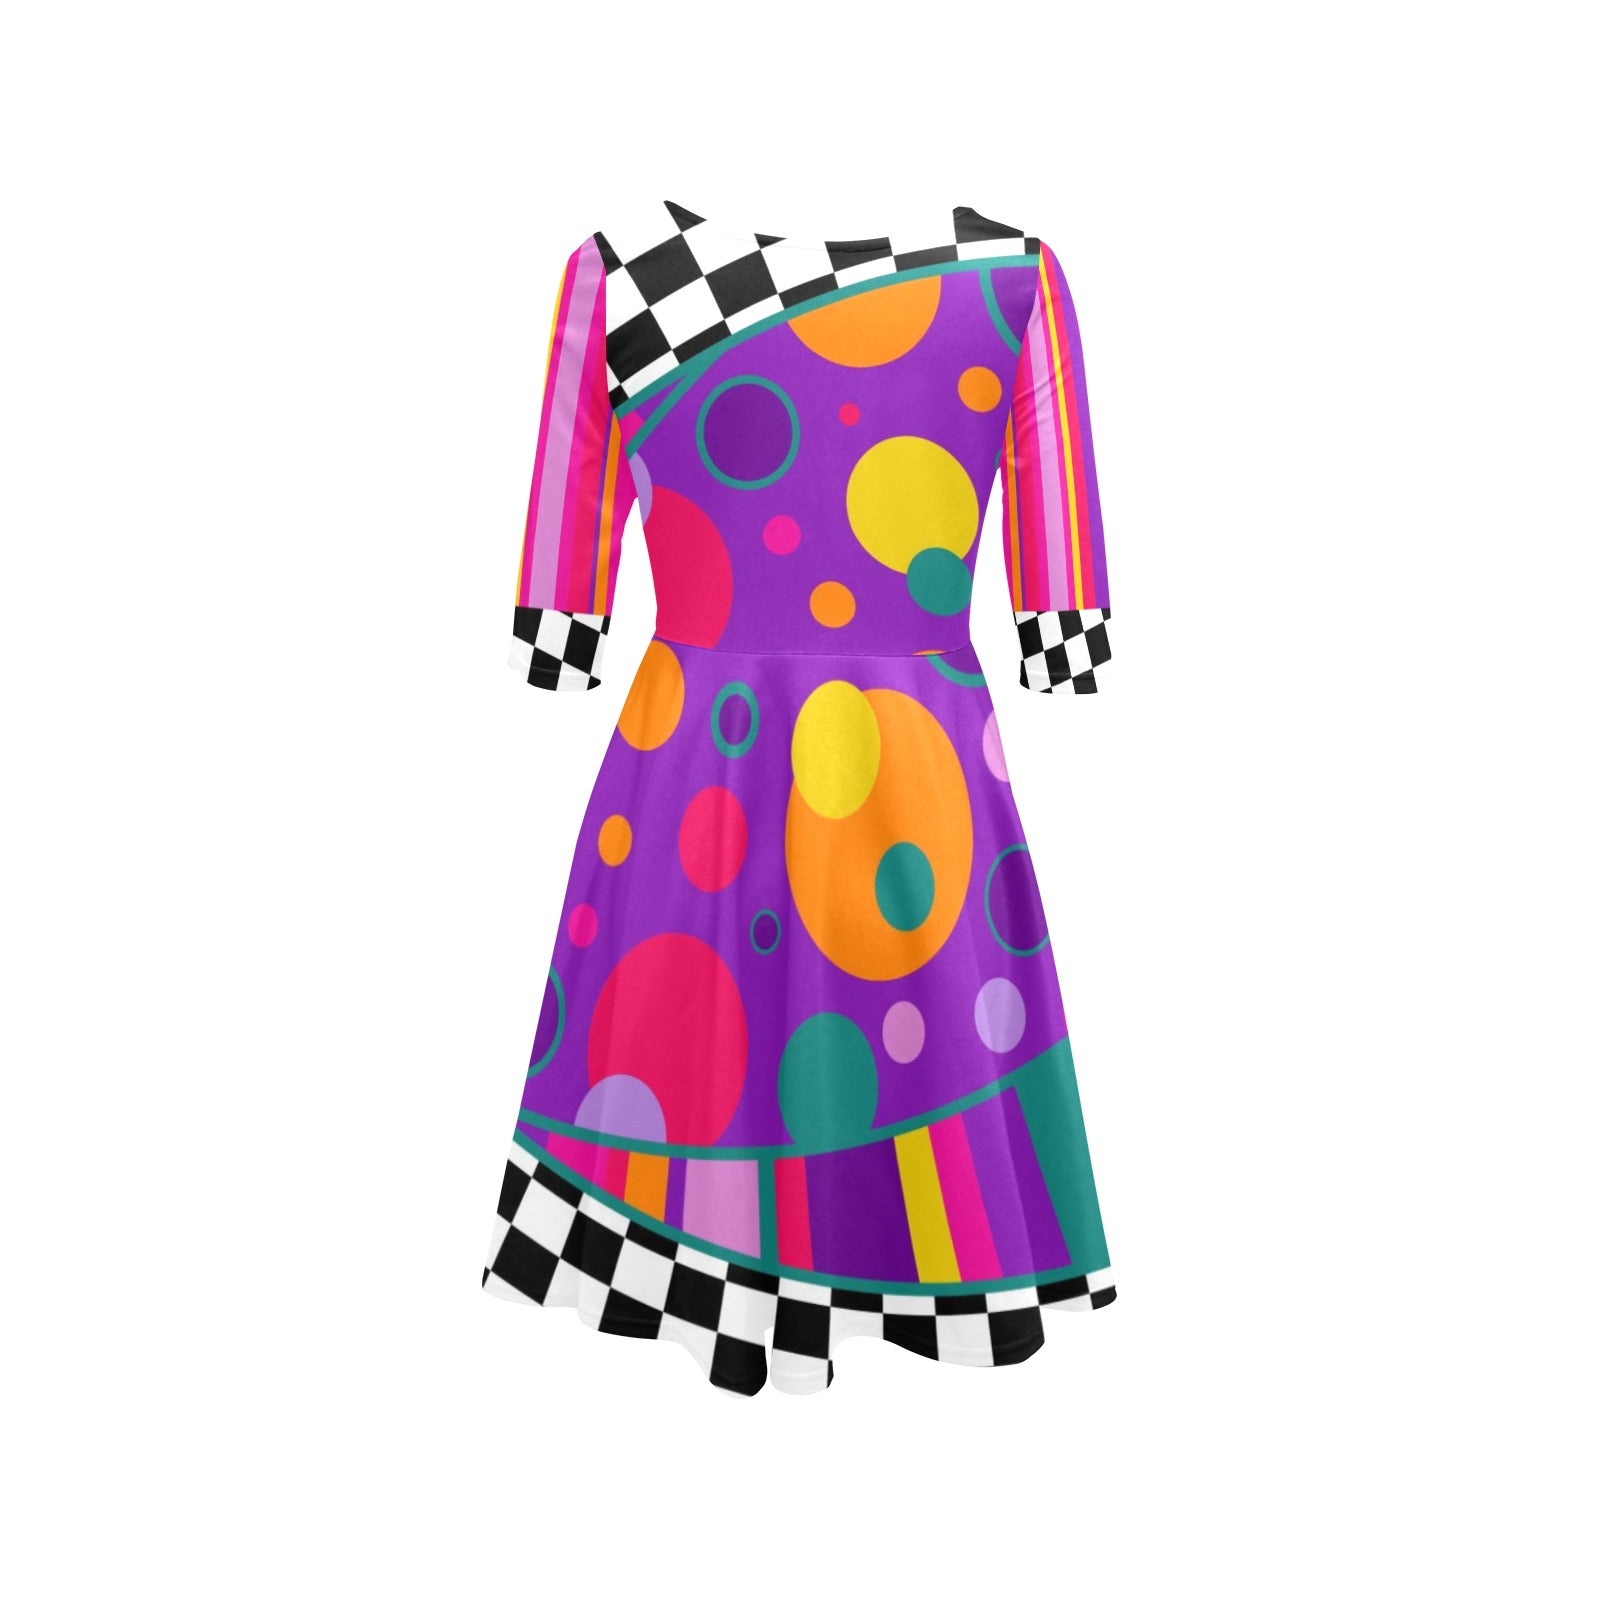 Dress with spots and checkers for face painters, clowns and entertainers